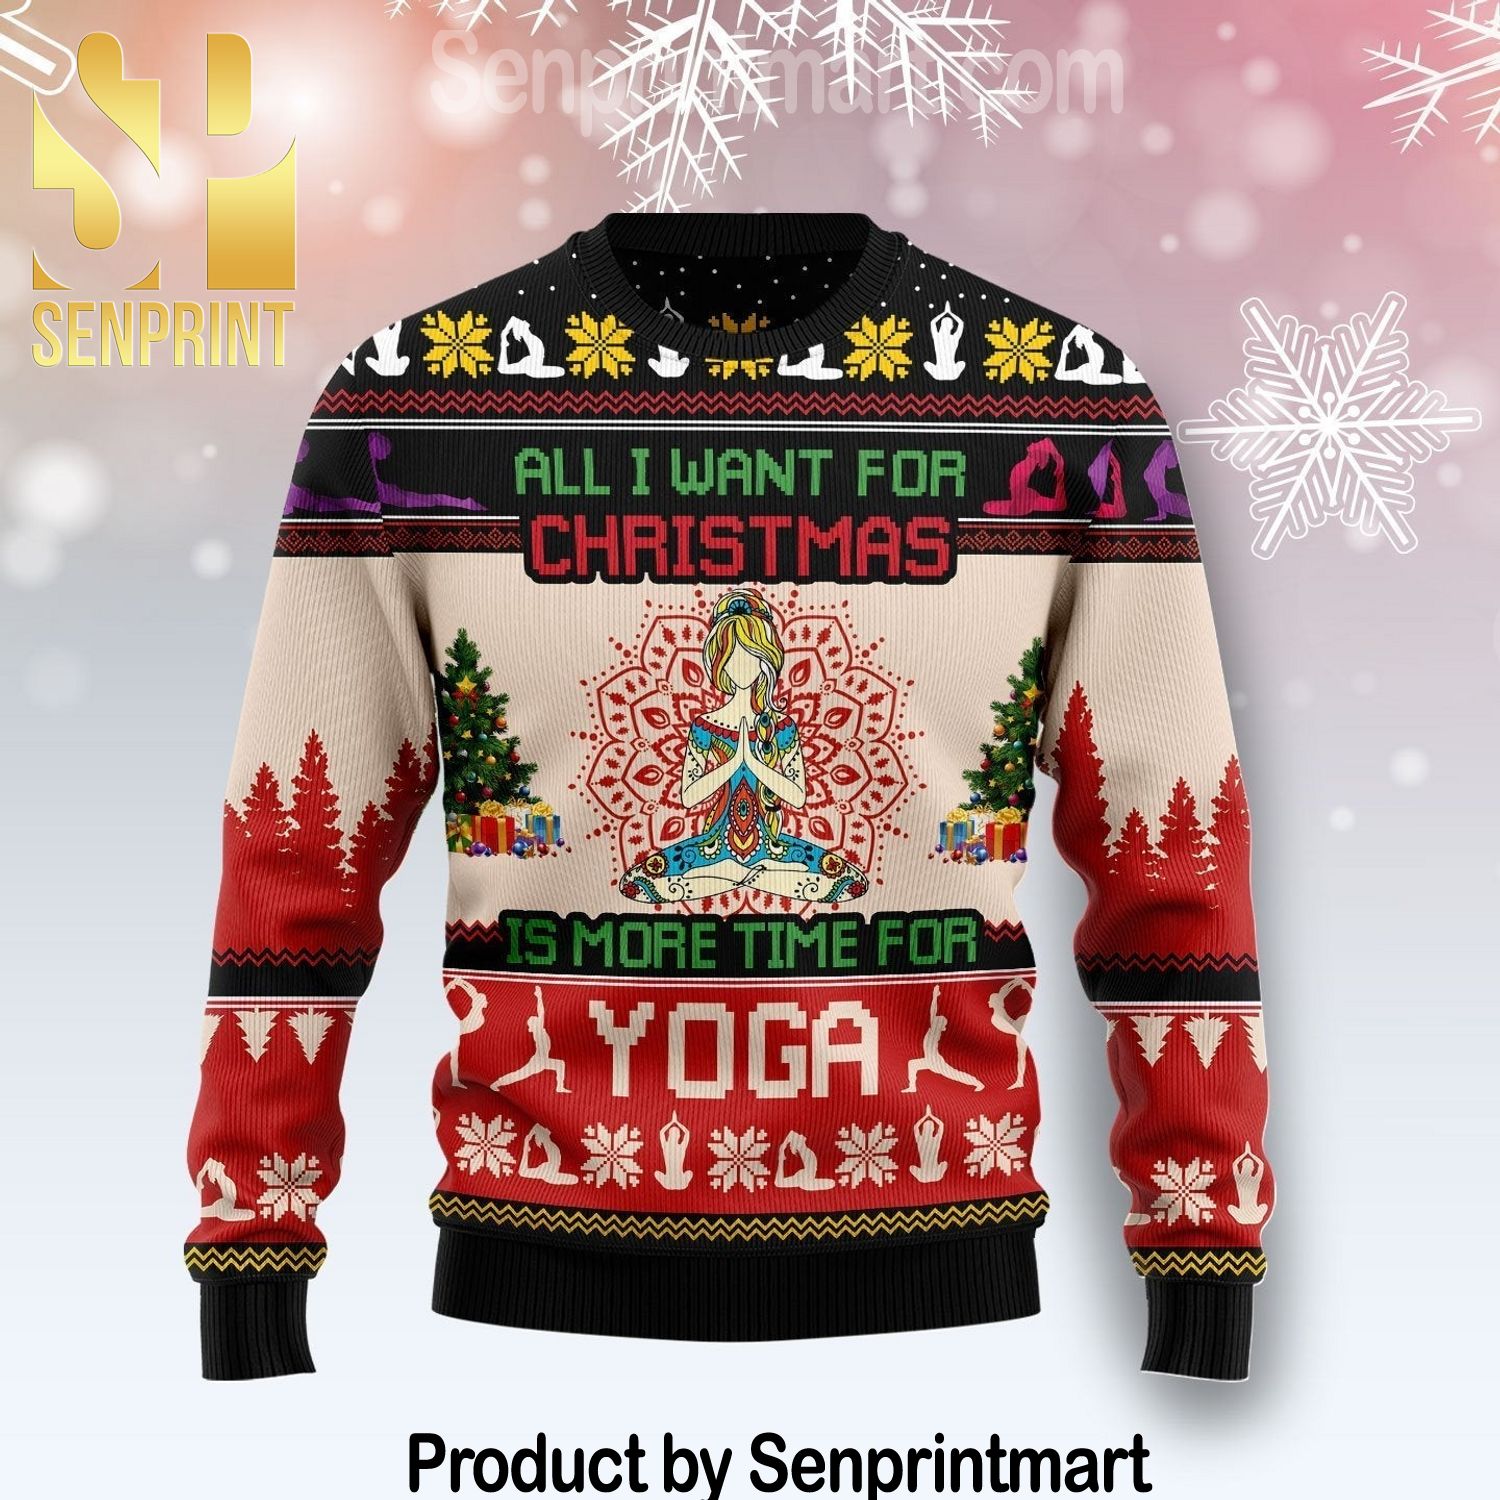 All I Want For Christmas Is More Time For Yoga 3D Holiday Knit Sweater